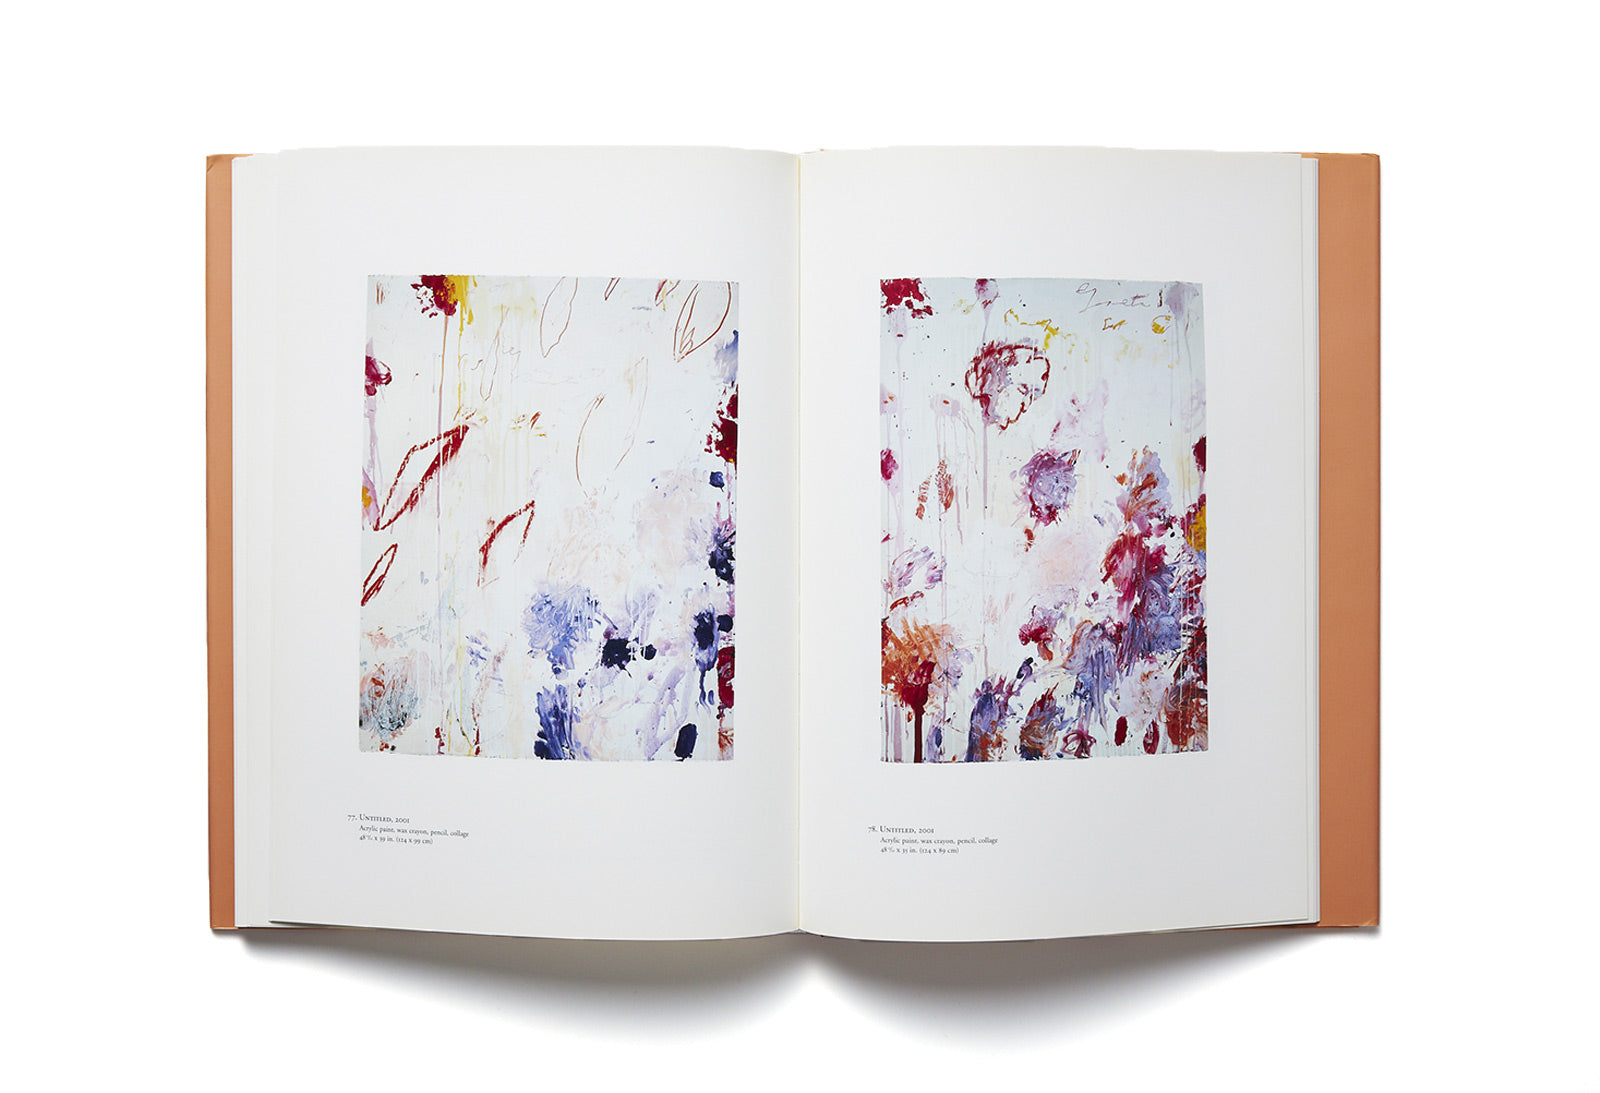 CY TWOMBLY / FIFTY YEARS OF WORKS ON PAPER – Sellenatela